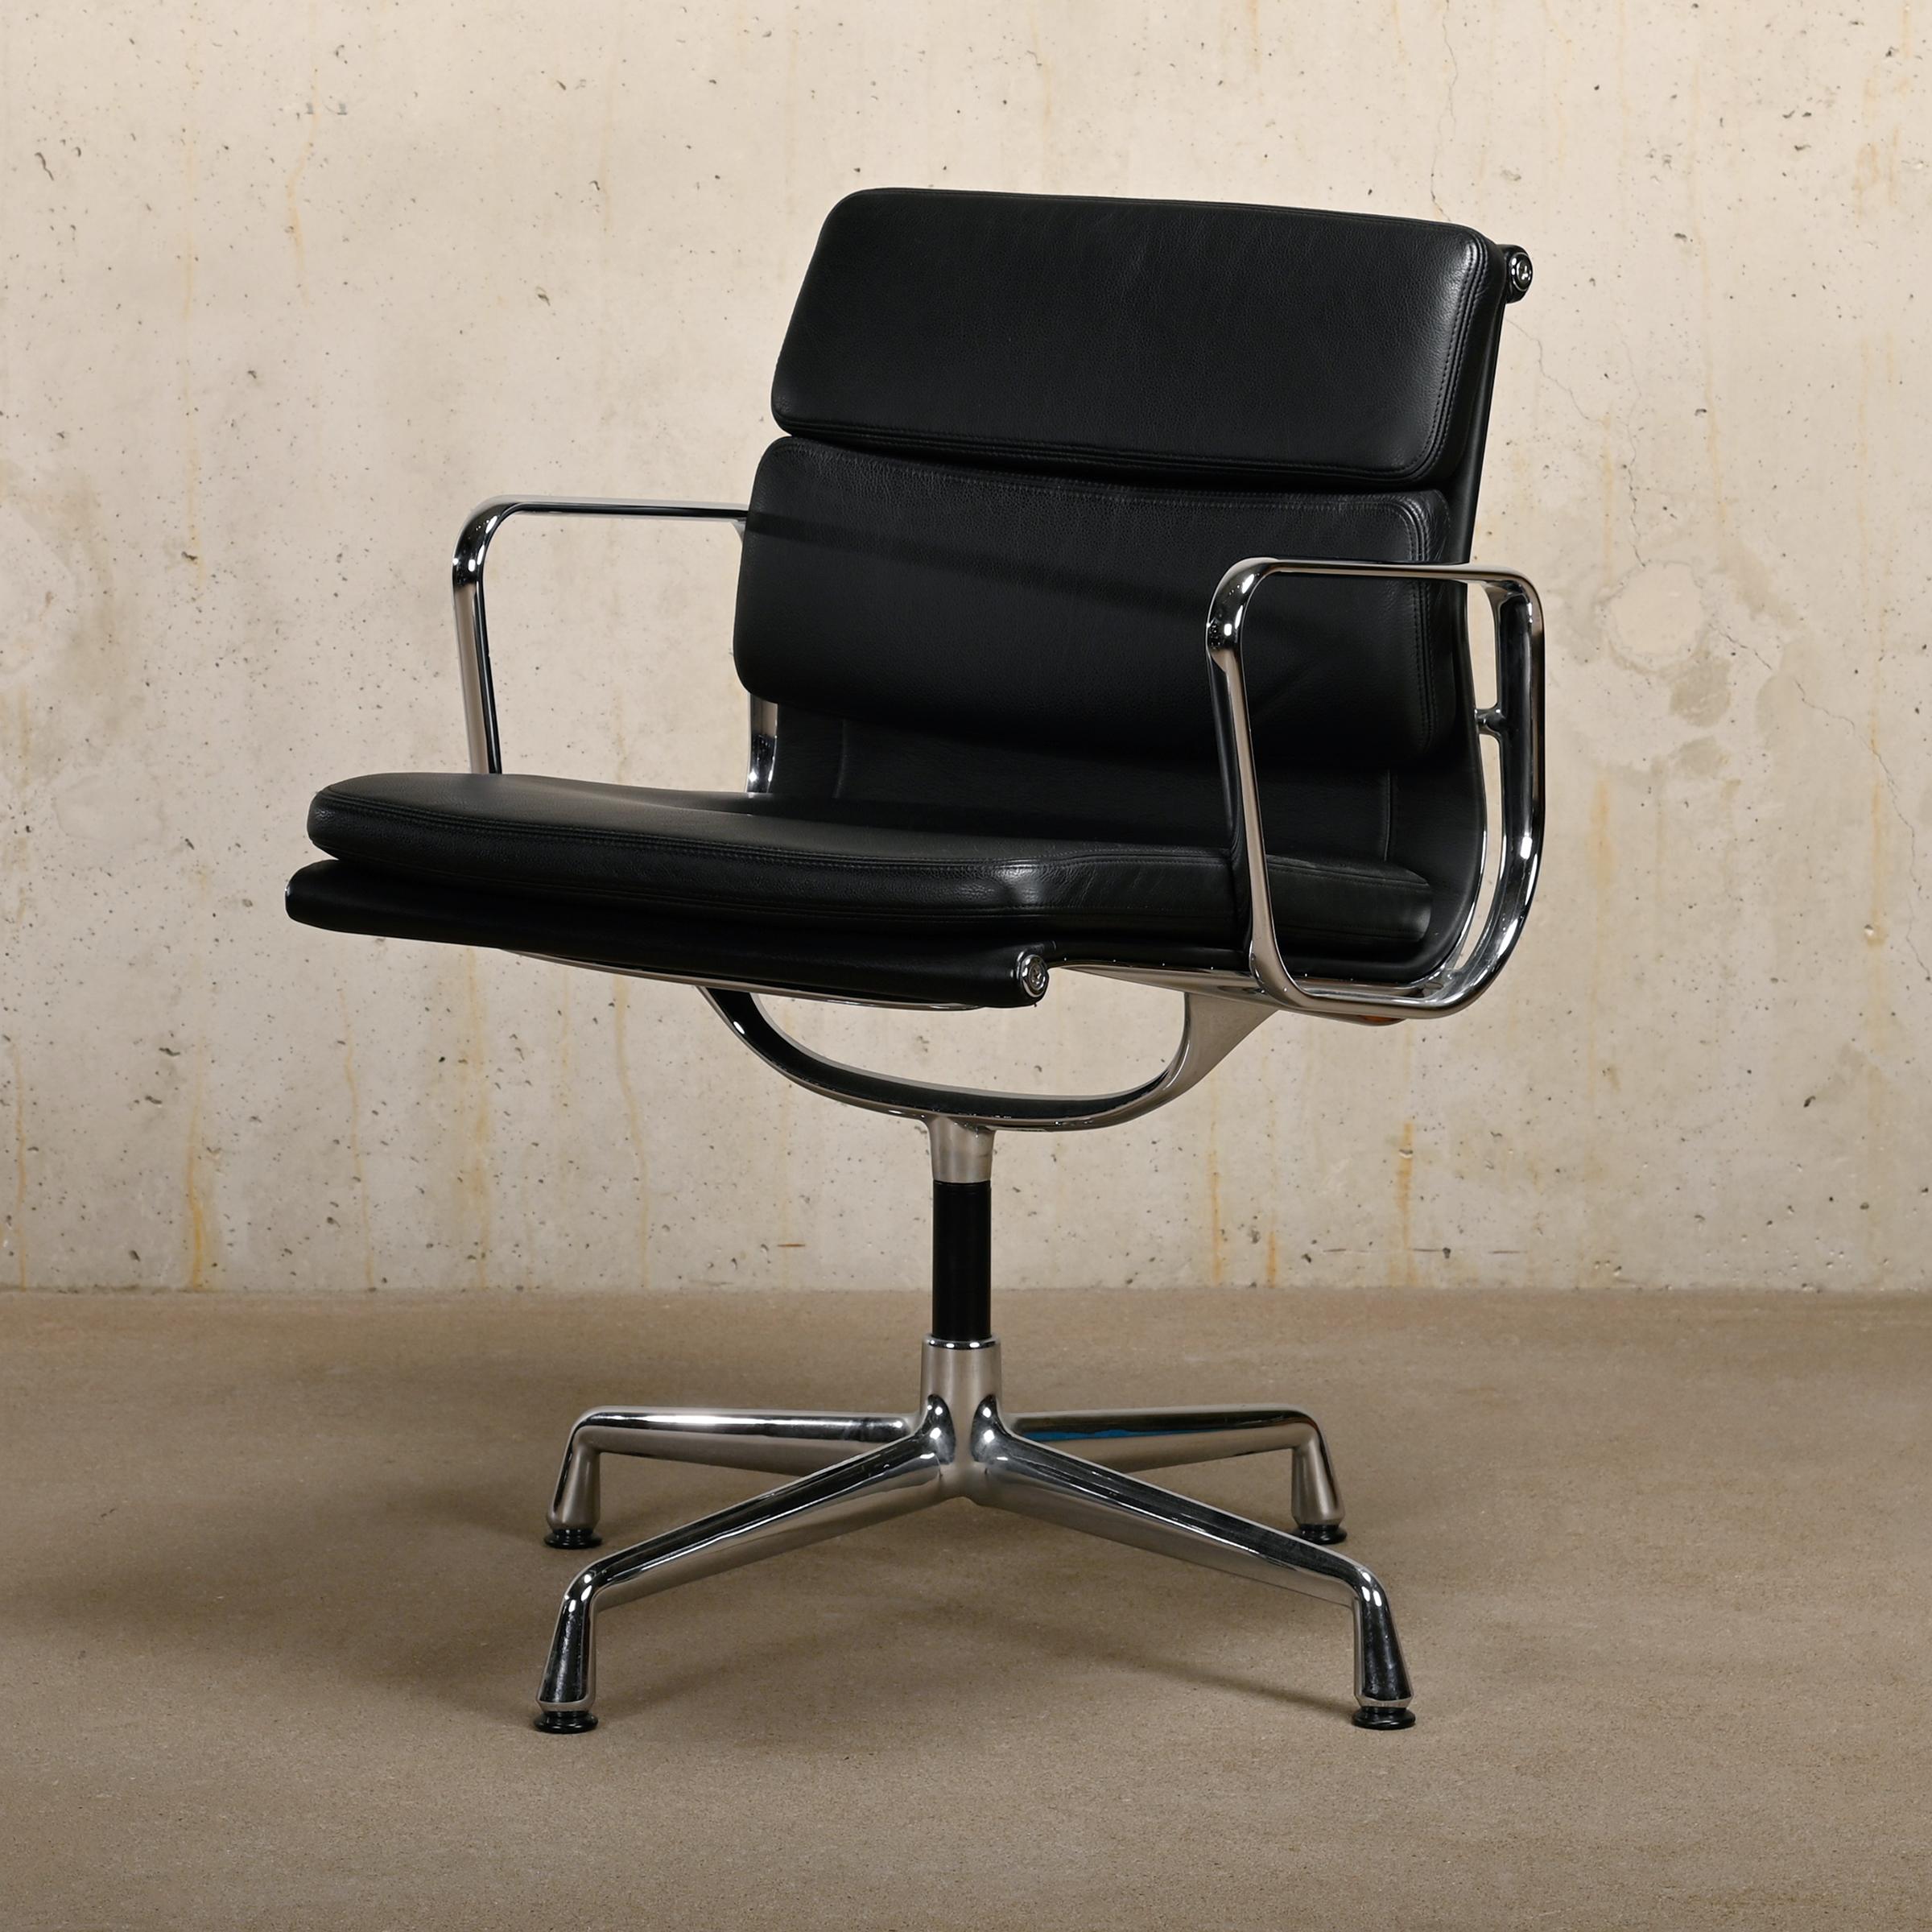 Charles & Ray Eames EA208 Dining or Conference Chair in Black leather, Vitra For Sale 1